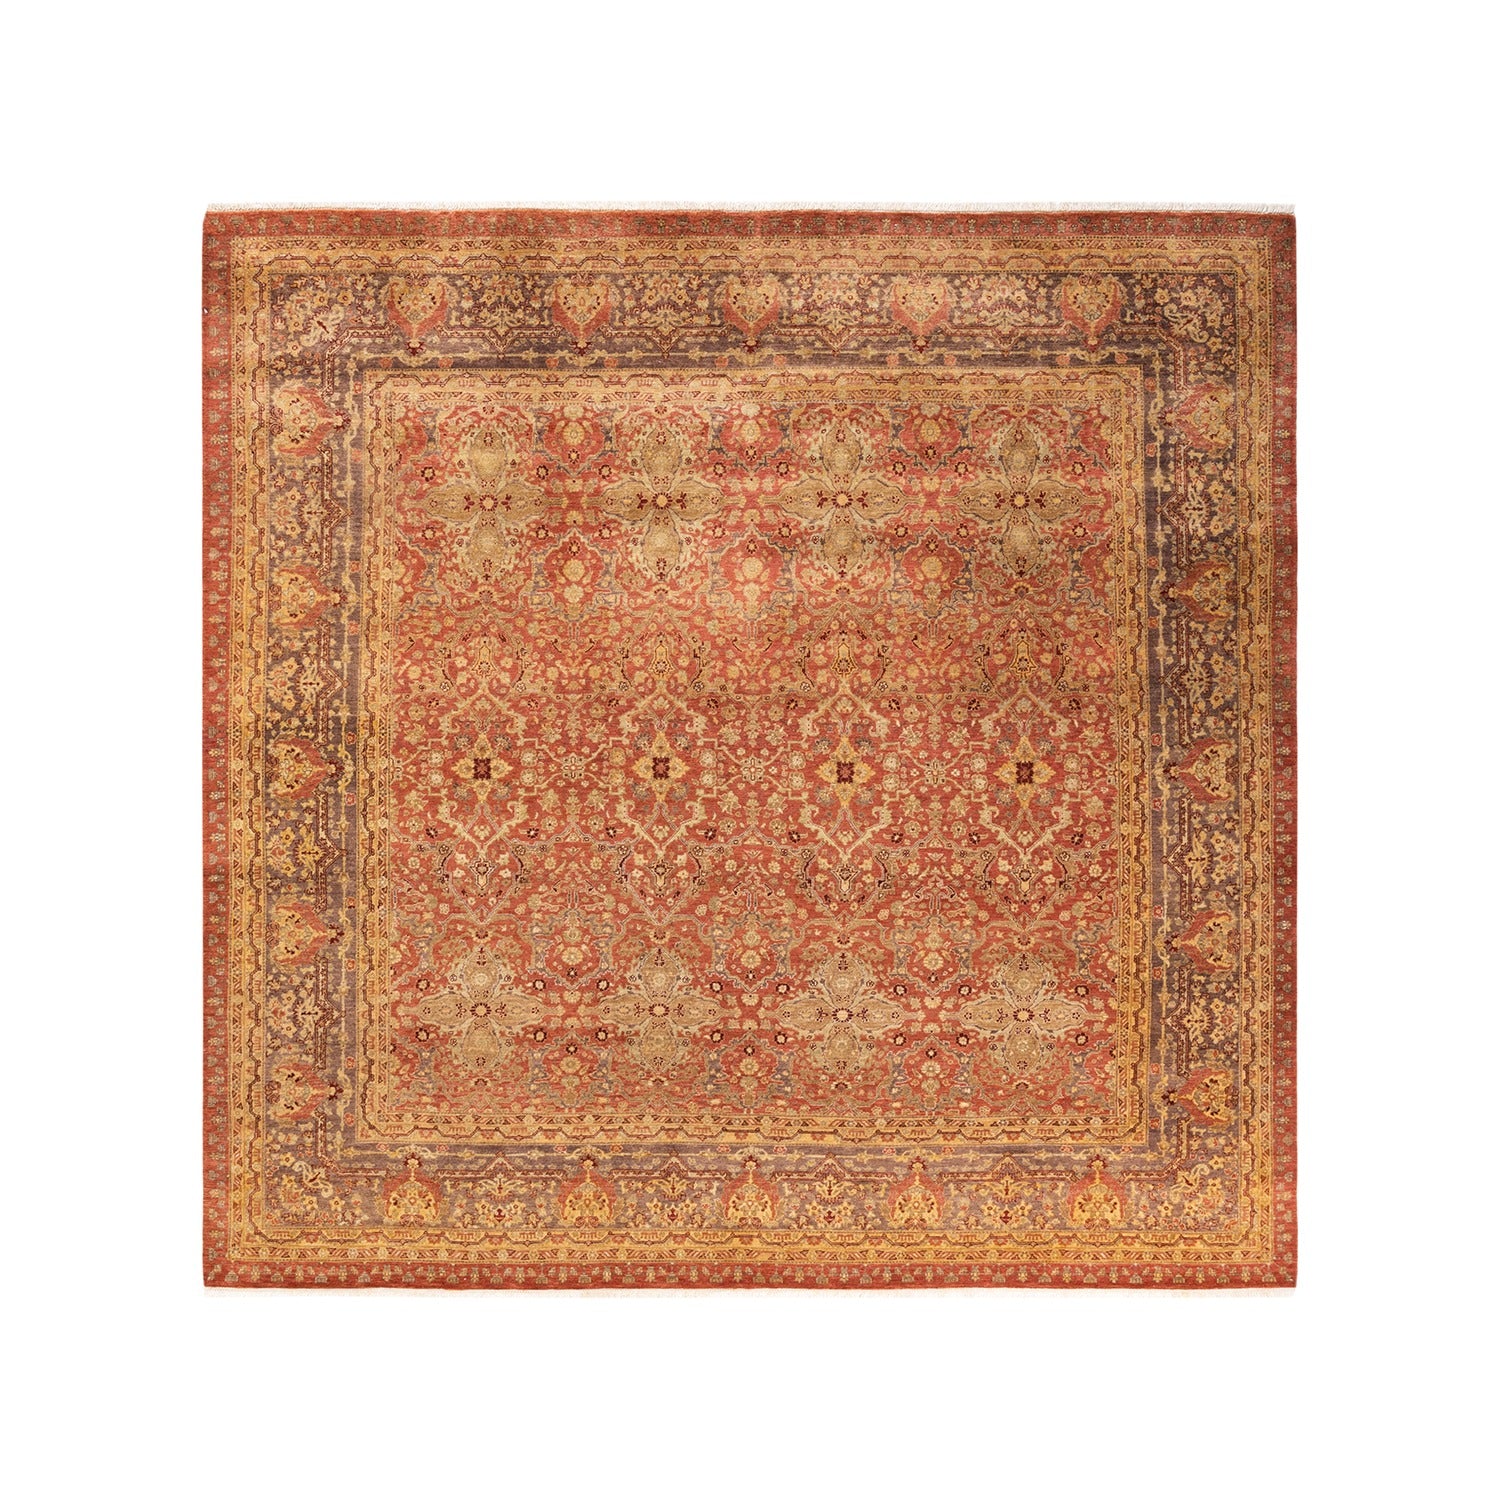 Exquisite handwoven rug with intricate traditional Persian-inspired designs in warm hues.